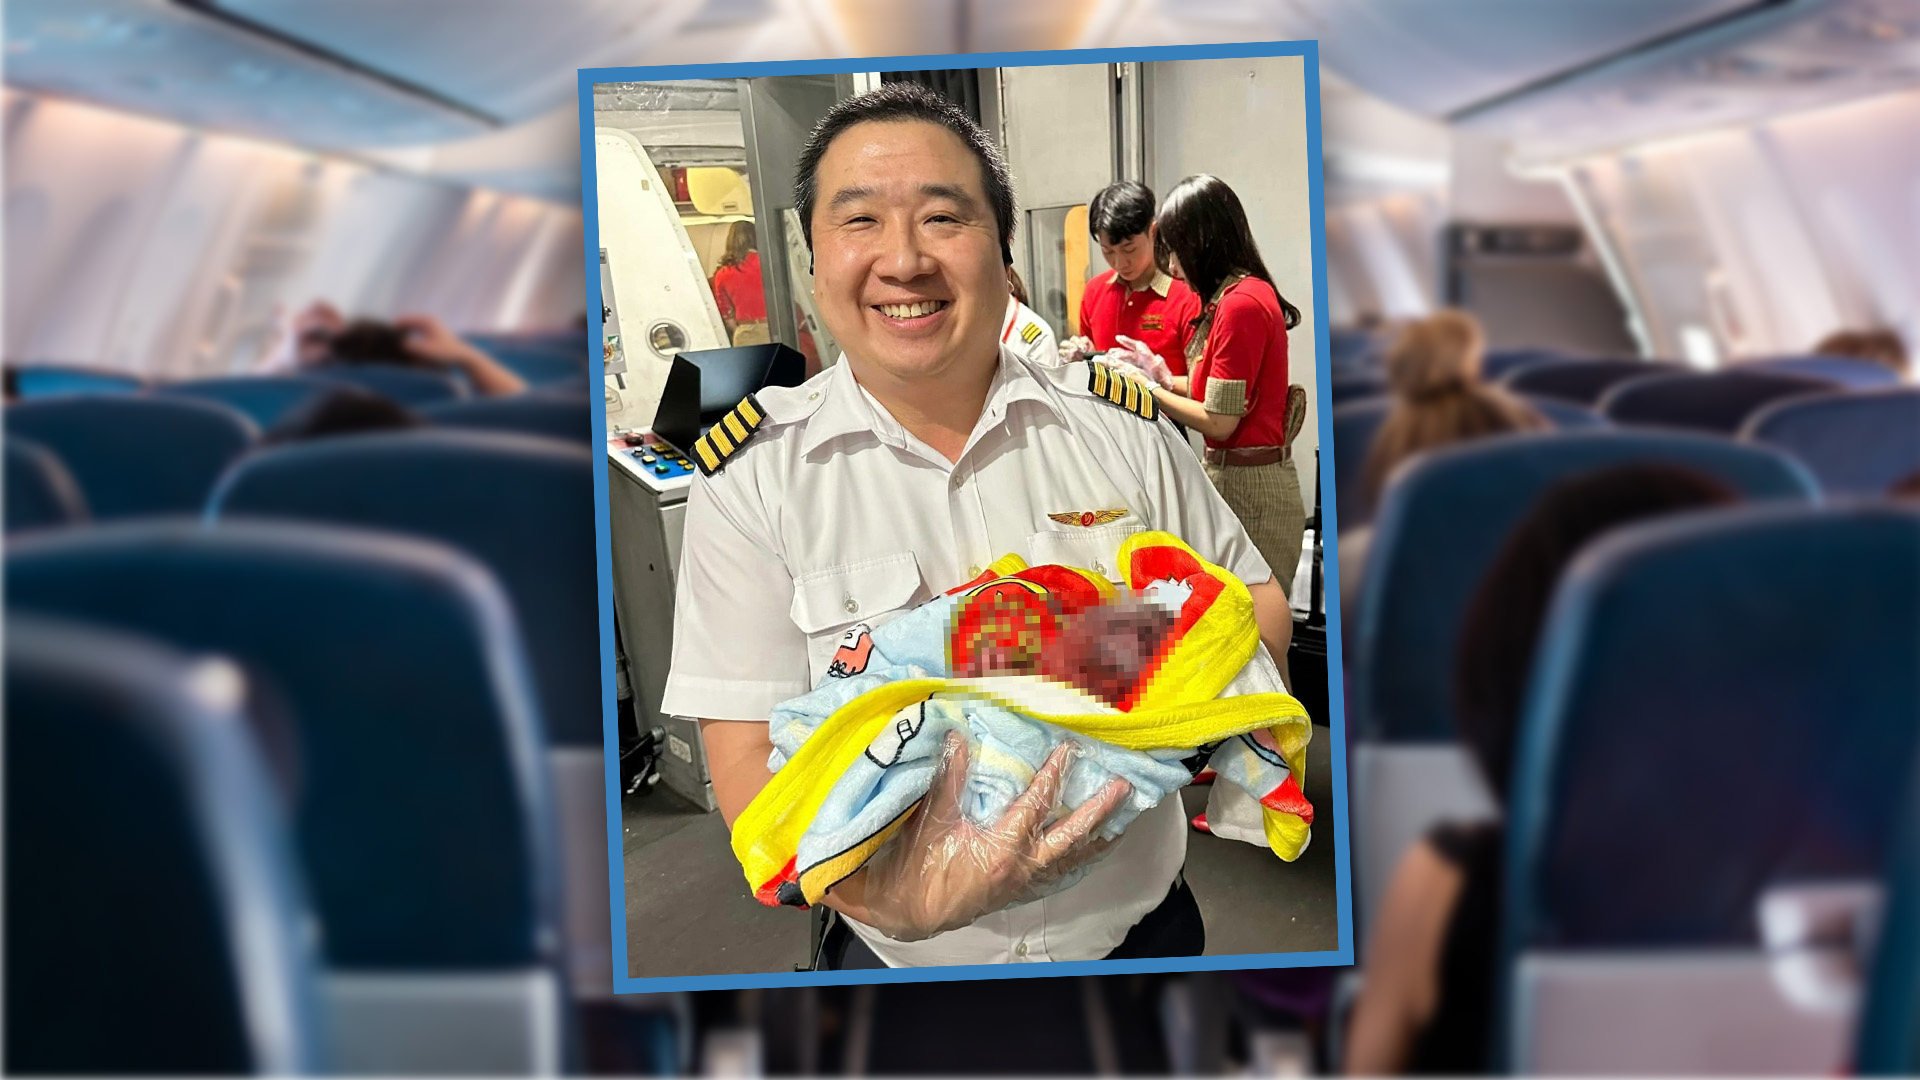 A commercial pilot who dashed from the cockpit of the plane he was flying from Taiwan to Thailand mid-flight to help deliver the baby of a passenger who had gone into labour in one of the aircraft’s toilets, has been hailed as a hero by people on social media in China. Photo: SCMP composite/Shutterstock/Instagram